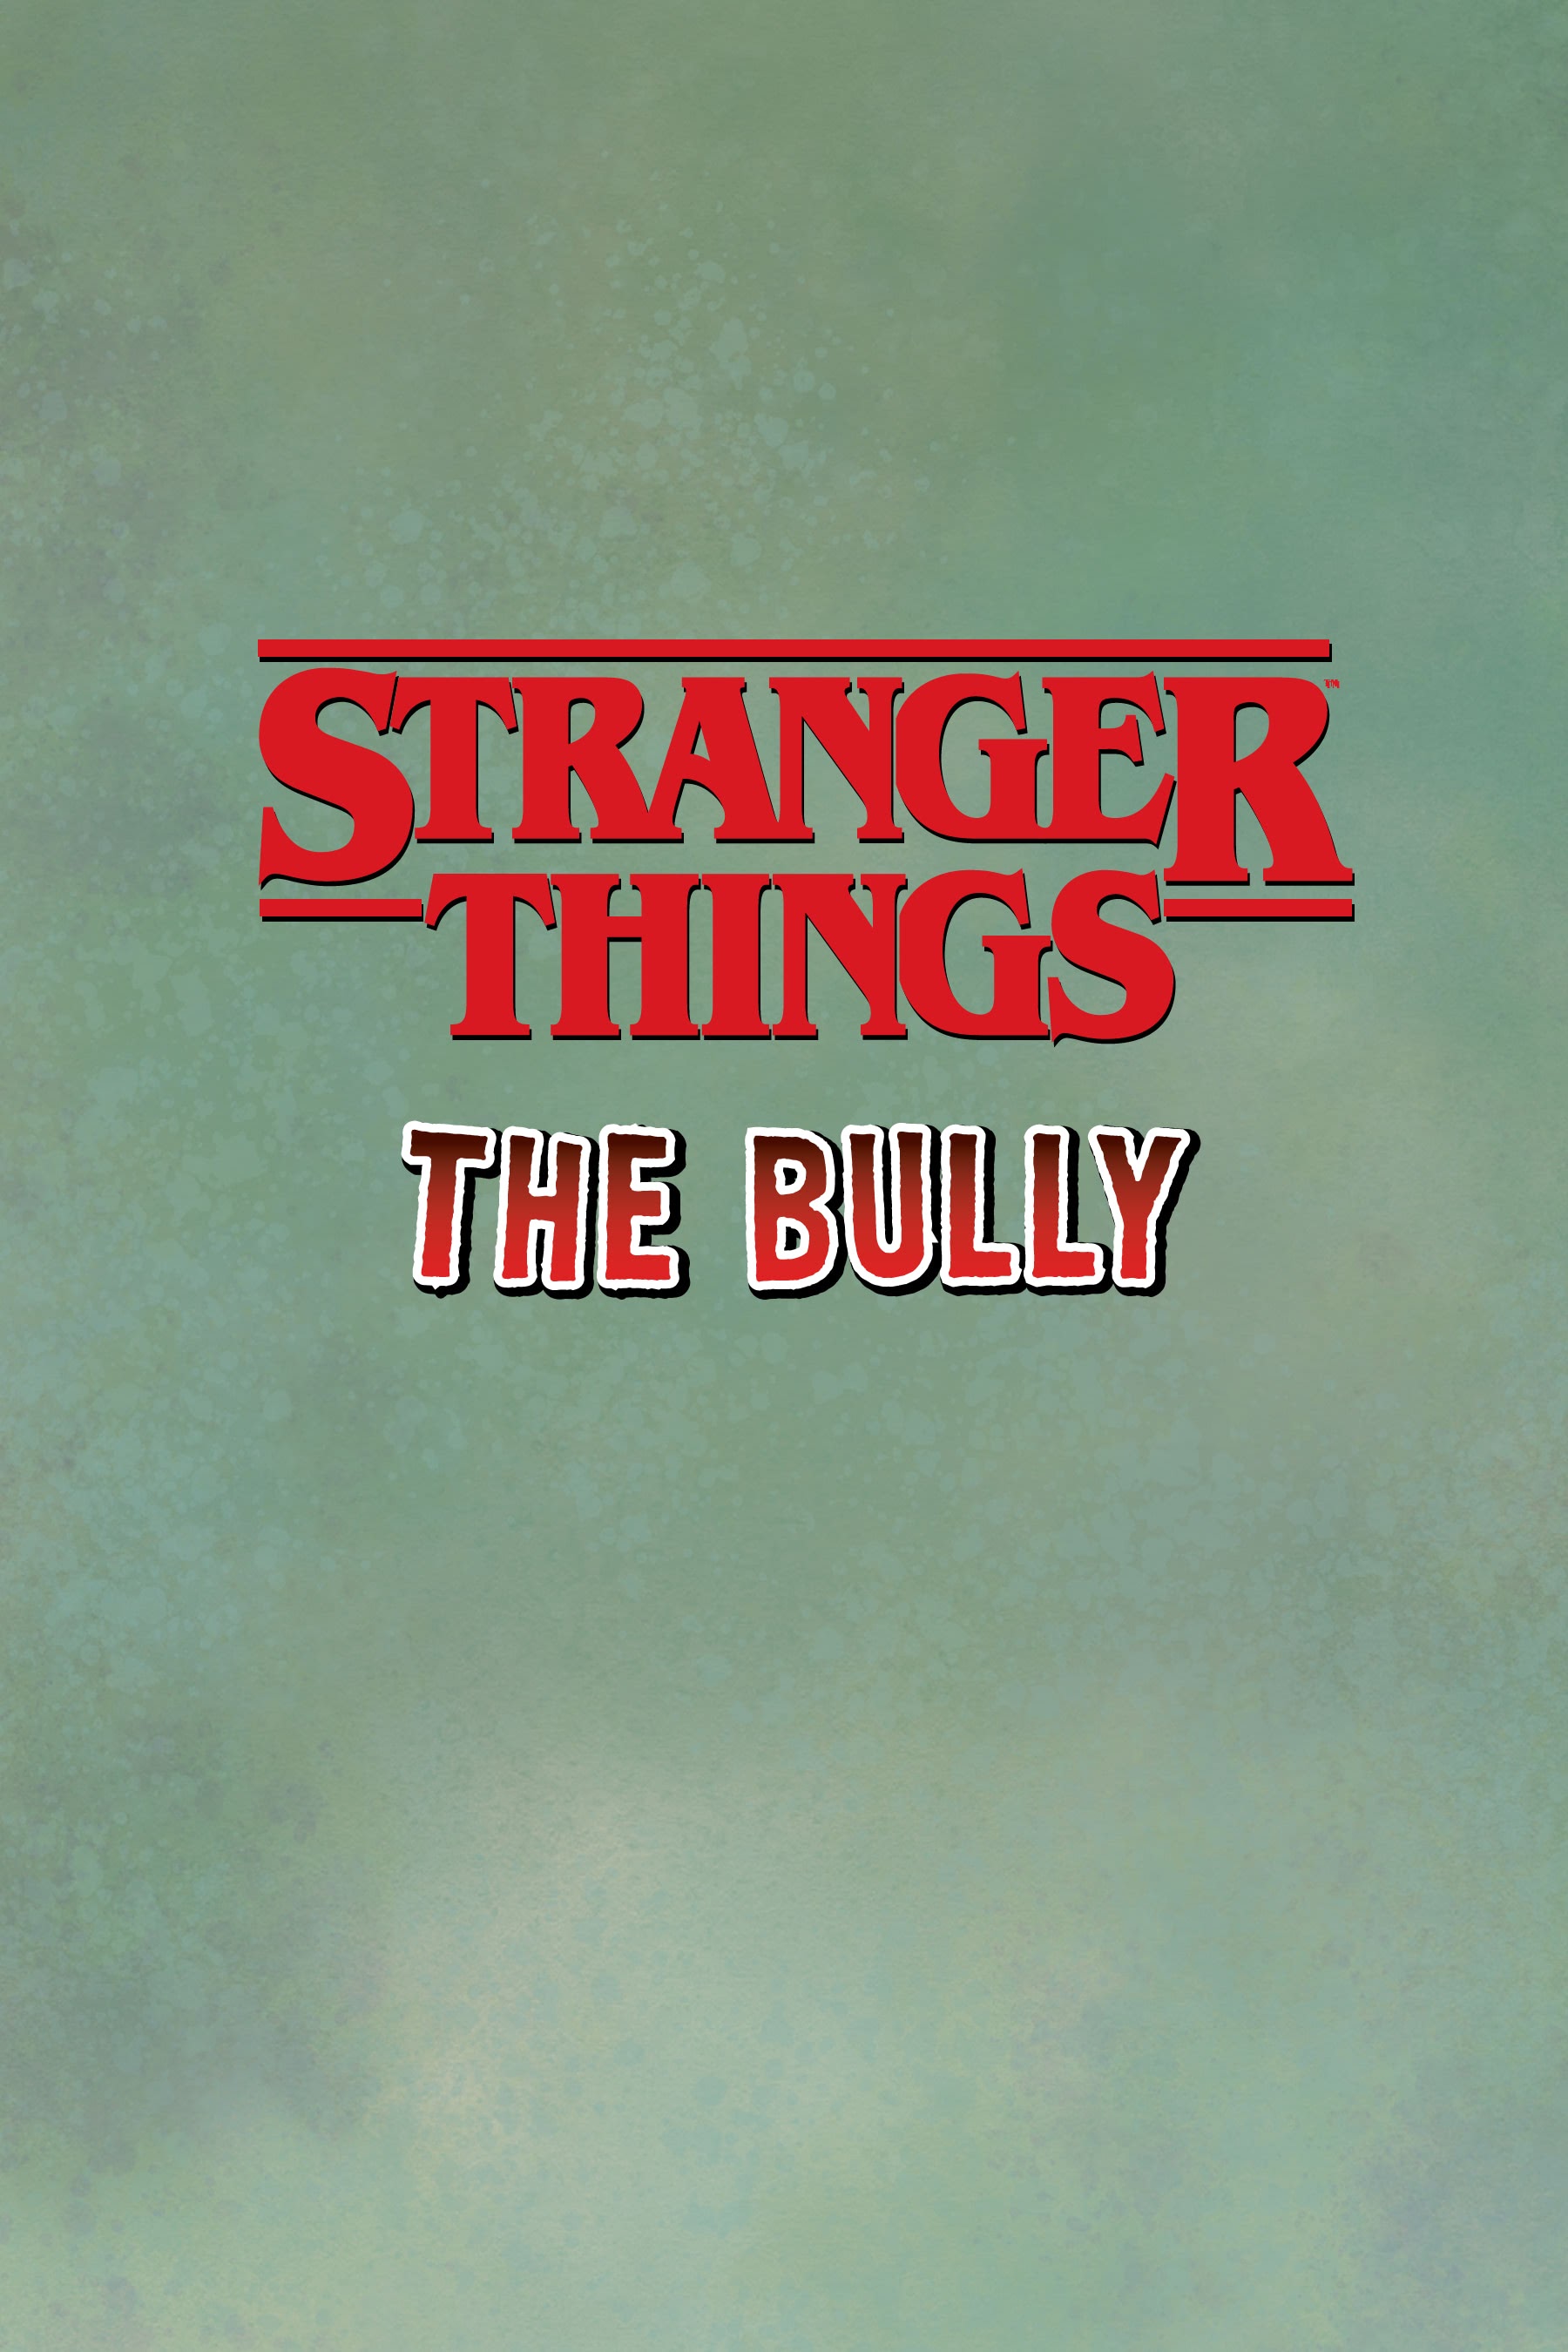 Read online Stranger Things: The Bully comic -  Issue # TPB - 2